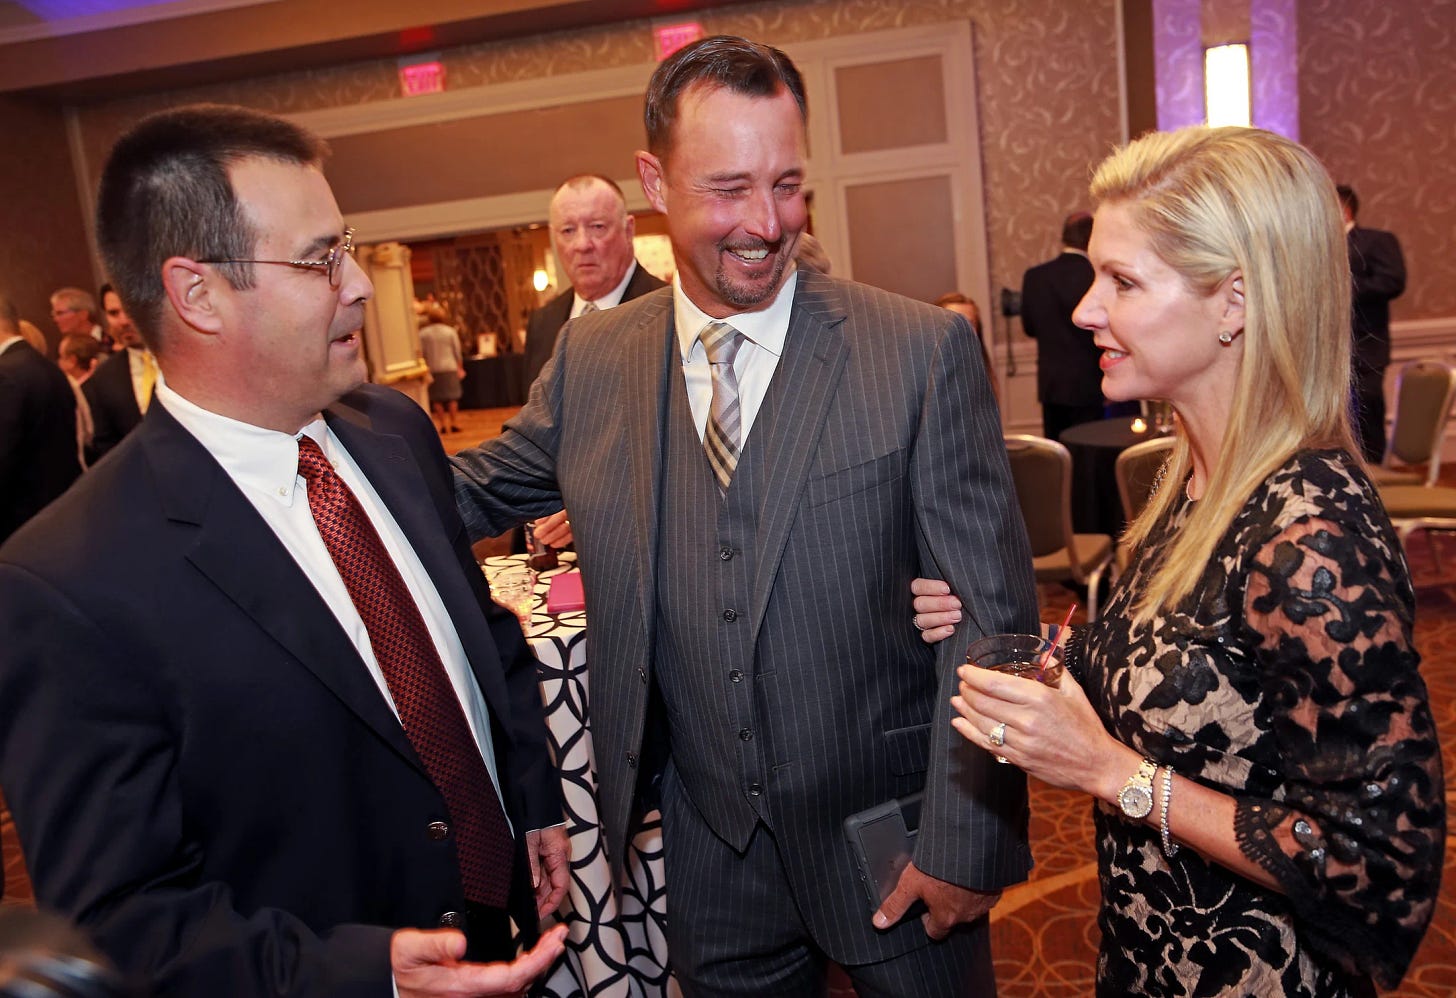 Former Red Sox pitcher Tim Wakefield (center) and his wife, Stacy, shown here in 2016, are survived by their two children. (Matt Stone/MediaNews Group/Boston Herald via Getty Images)